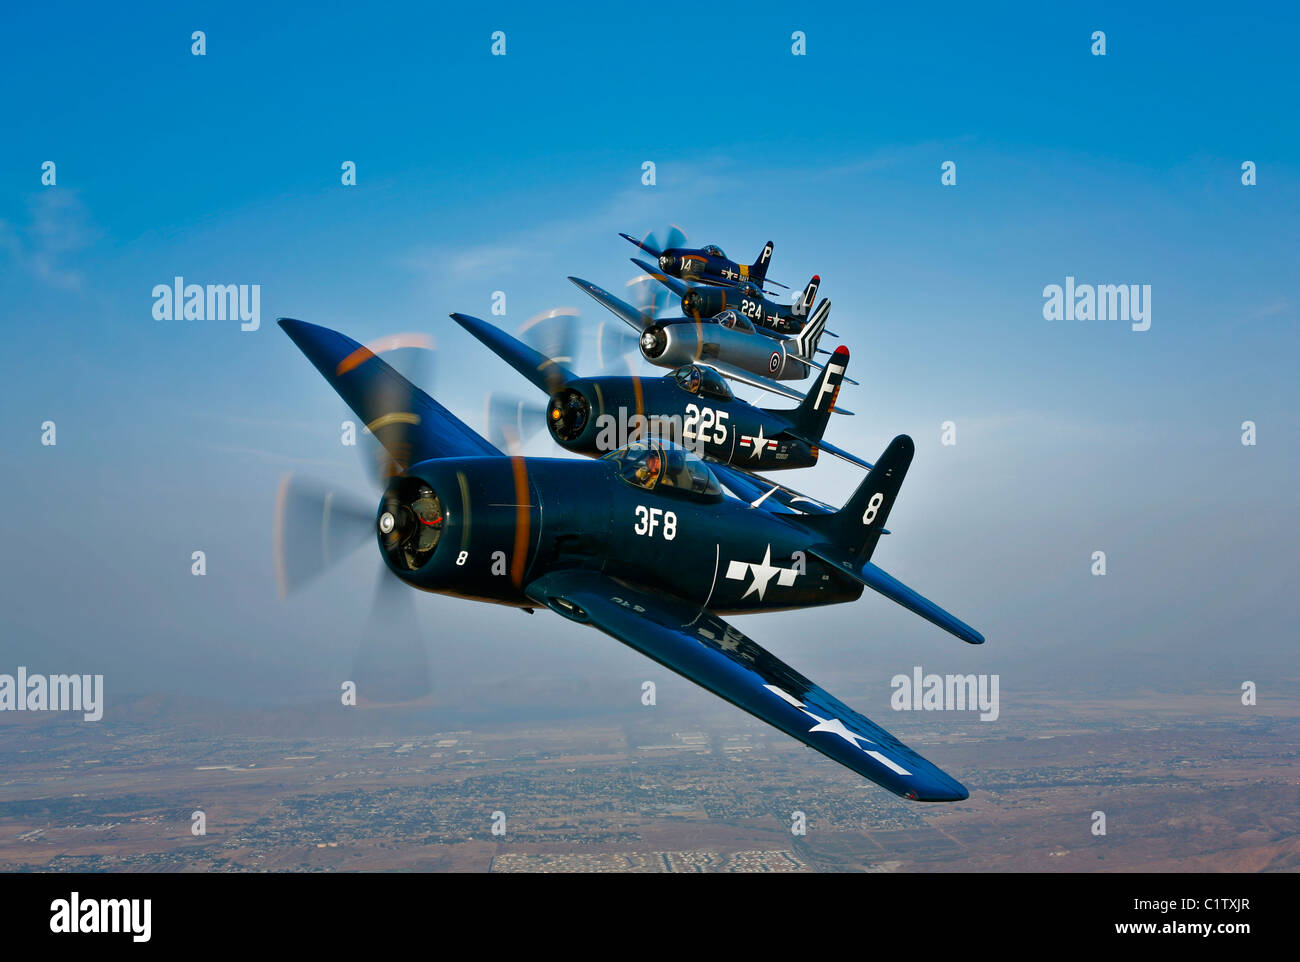 Five Grumman F8F Bearcats in formation, probably the first time since the early 1950s. Stock Photo